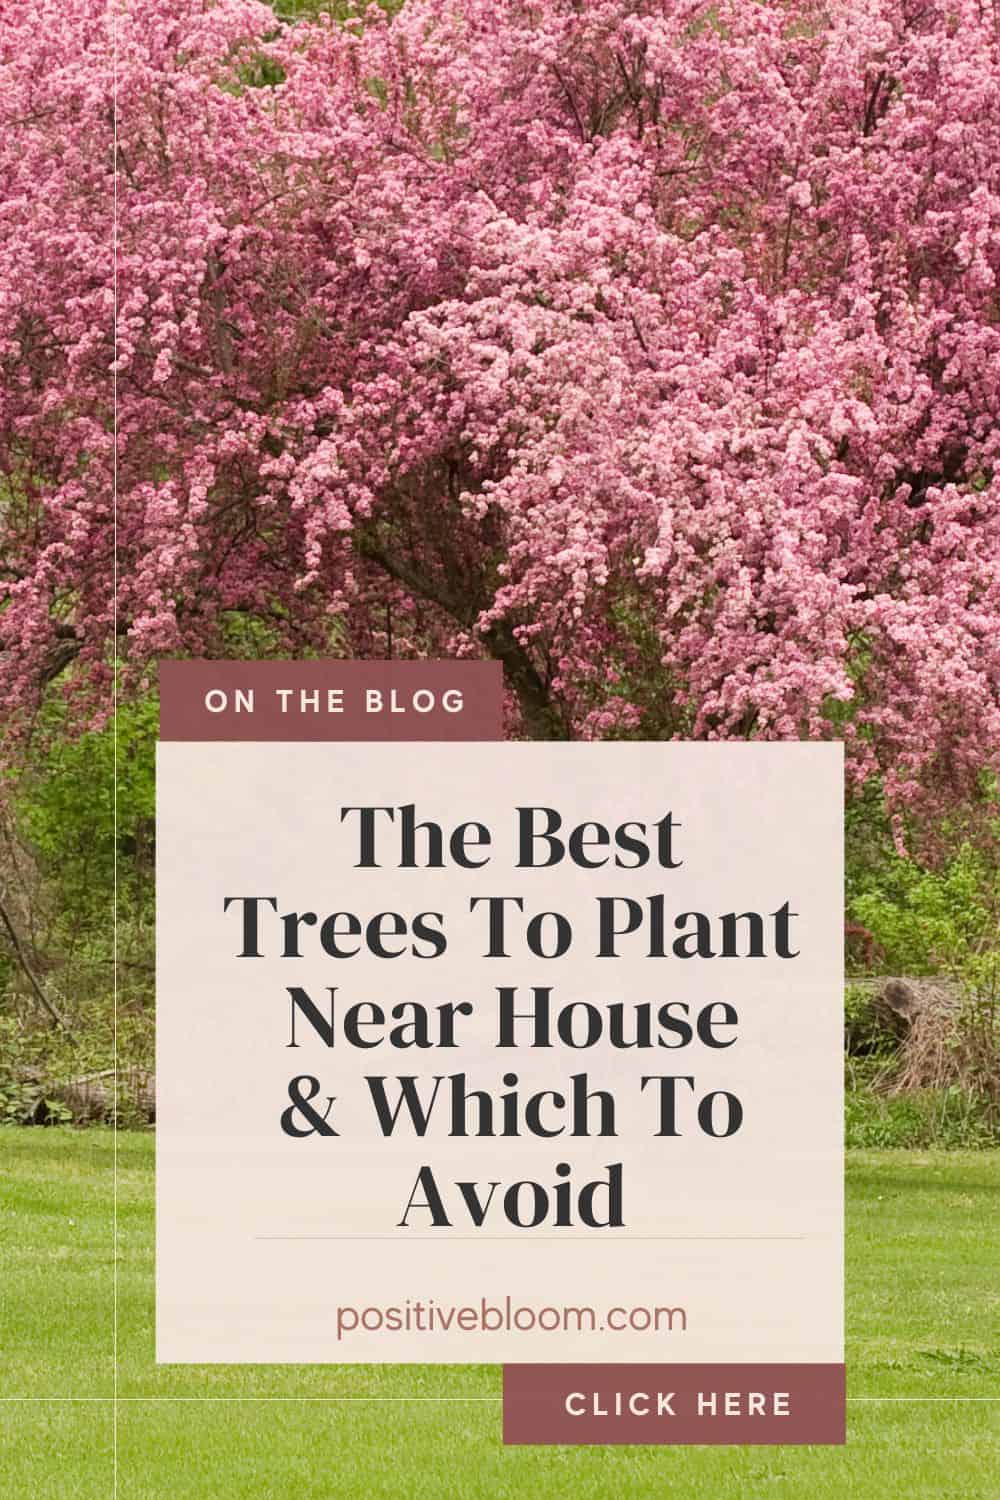 The Best Trees To Plant Near House & Which To Avoid Pinterest